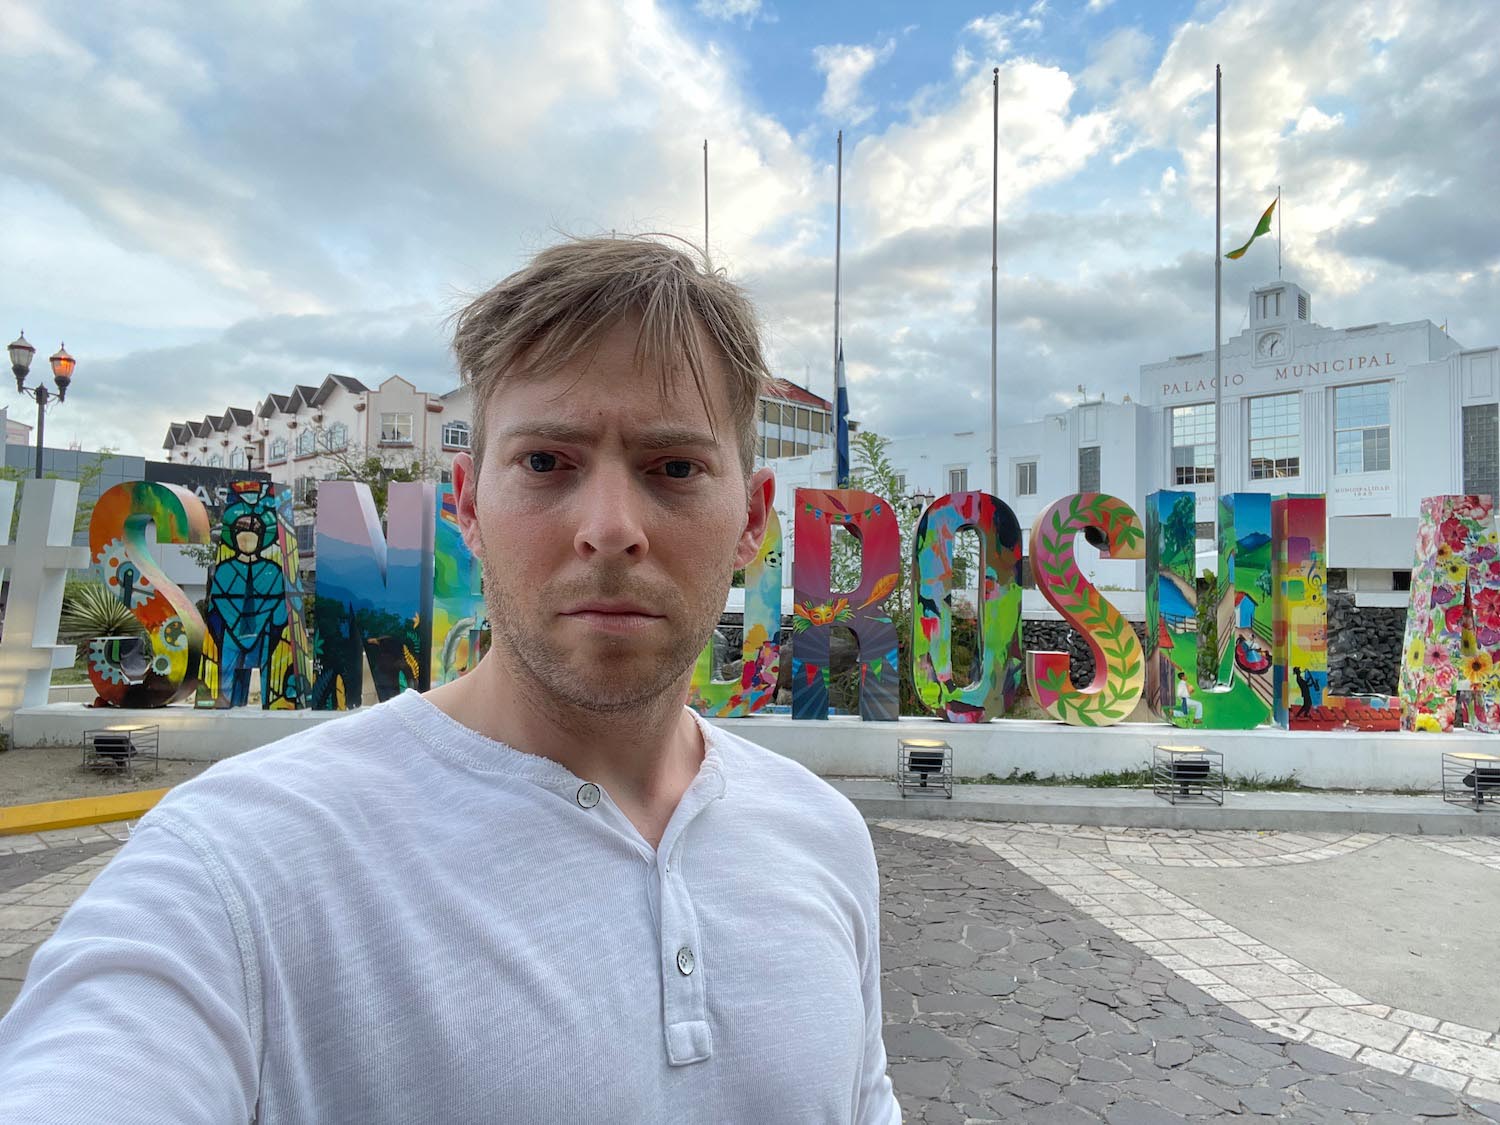 a man taking a selfie in front of a sign